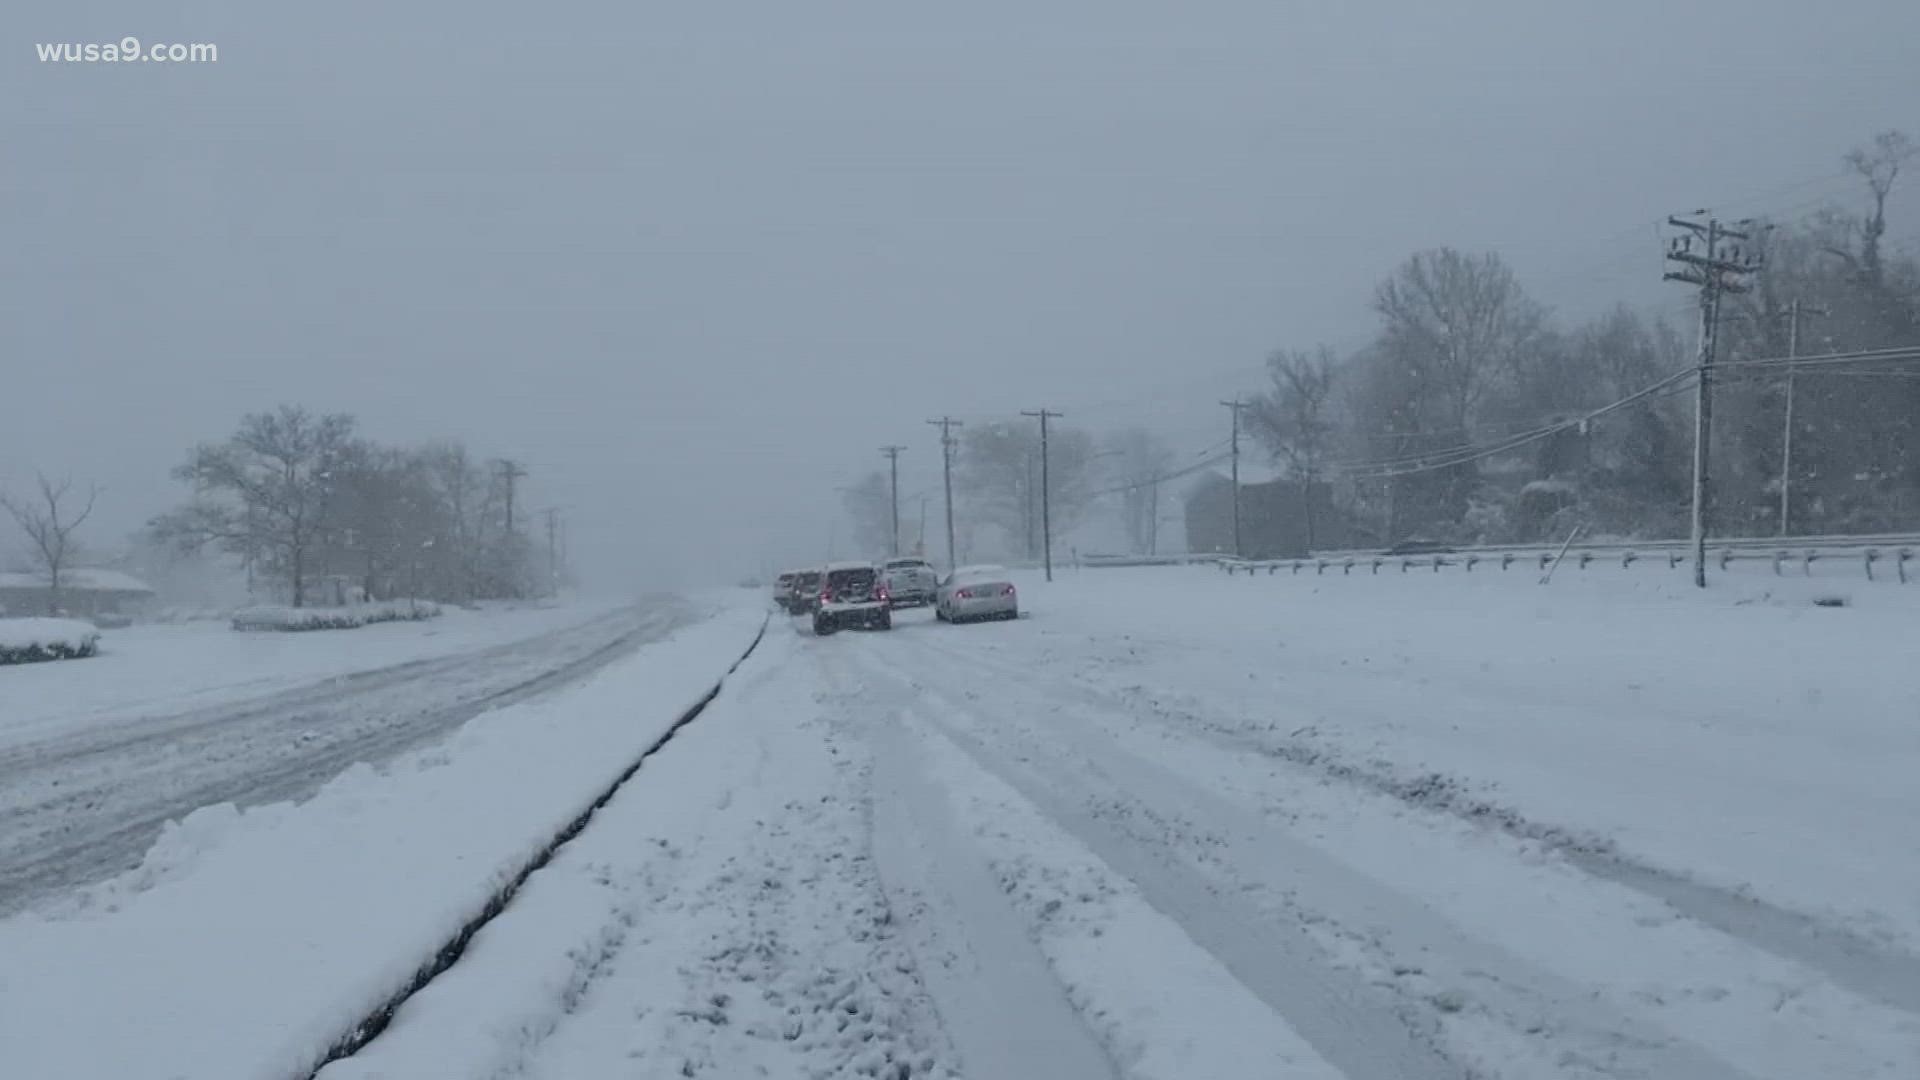 Monday's snow storm left many drivers stranded on the roads in Maryland.